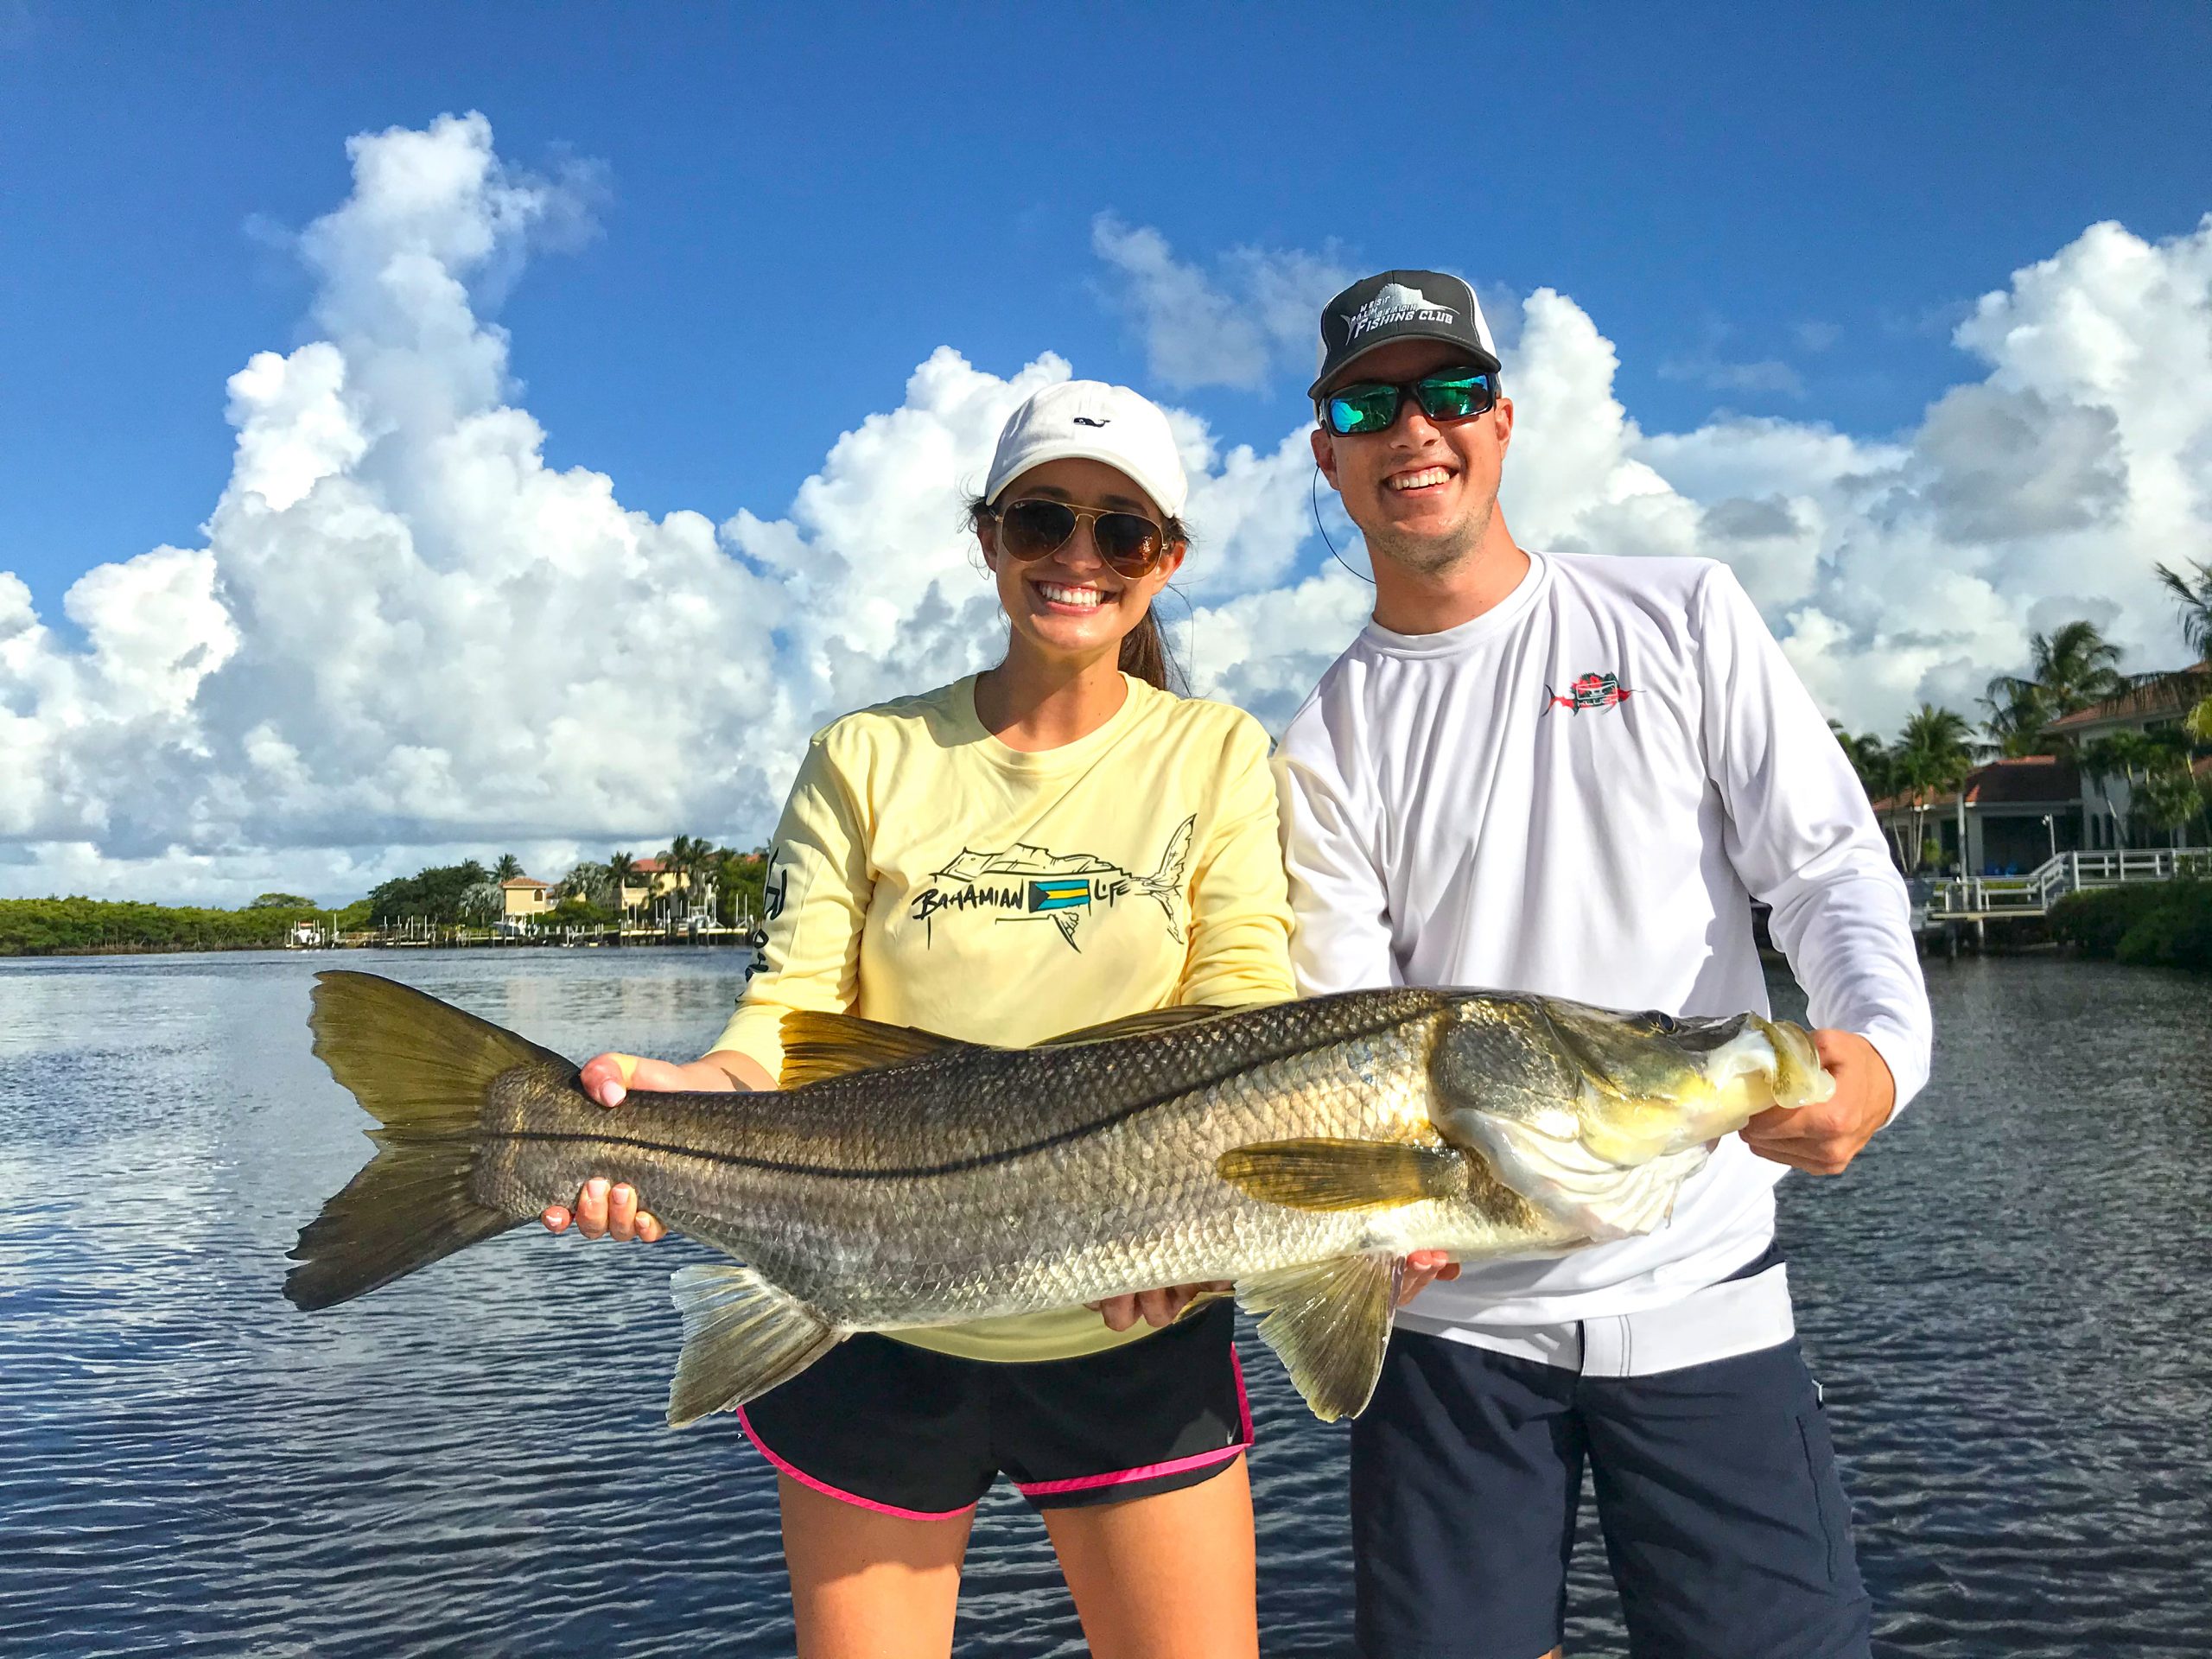 Kelsey Hagan 22 lb snook on 12 gen with an artifical lure in the Lox River on 7-19-20